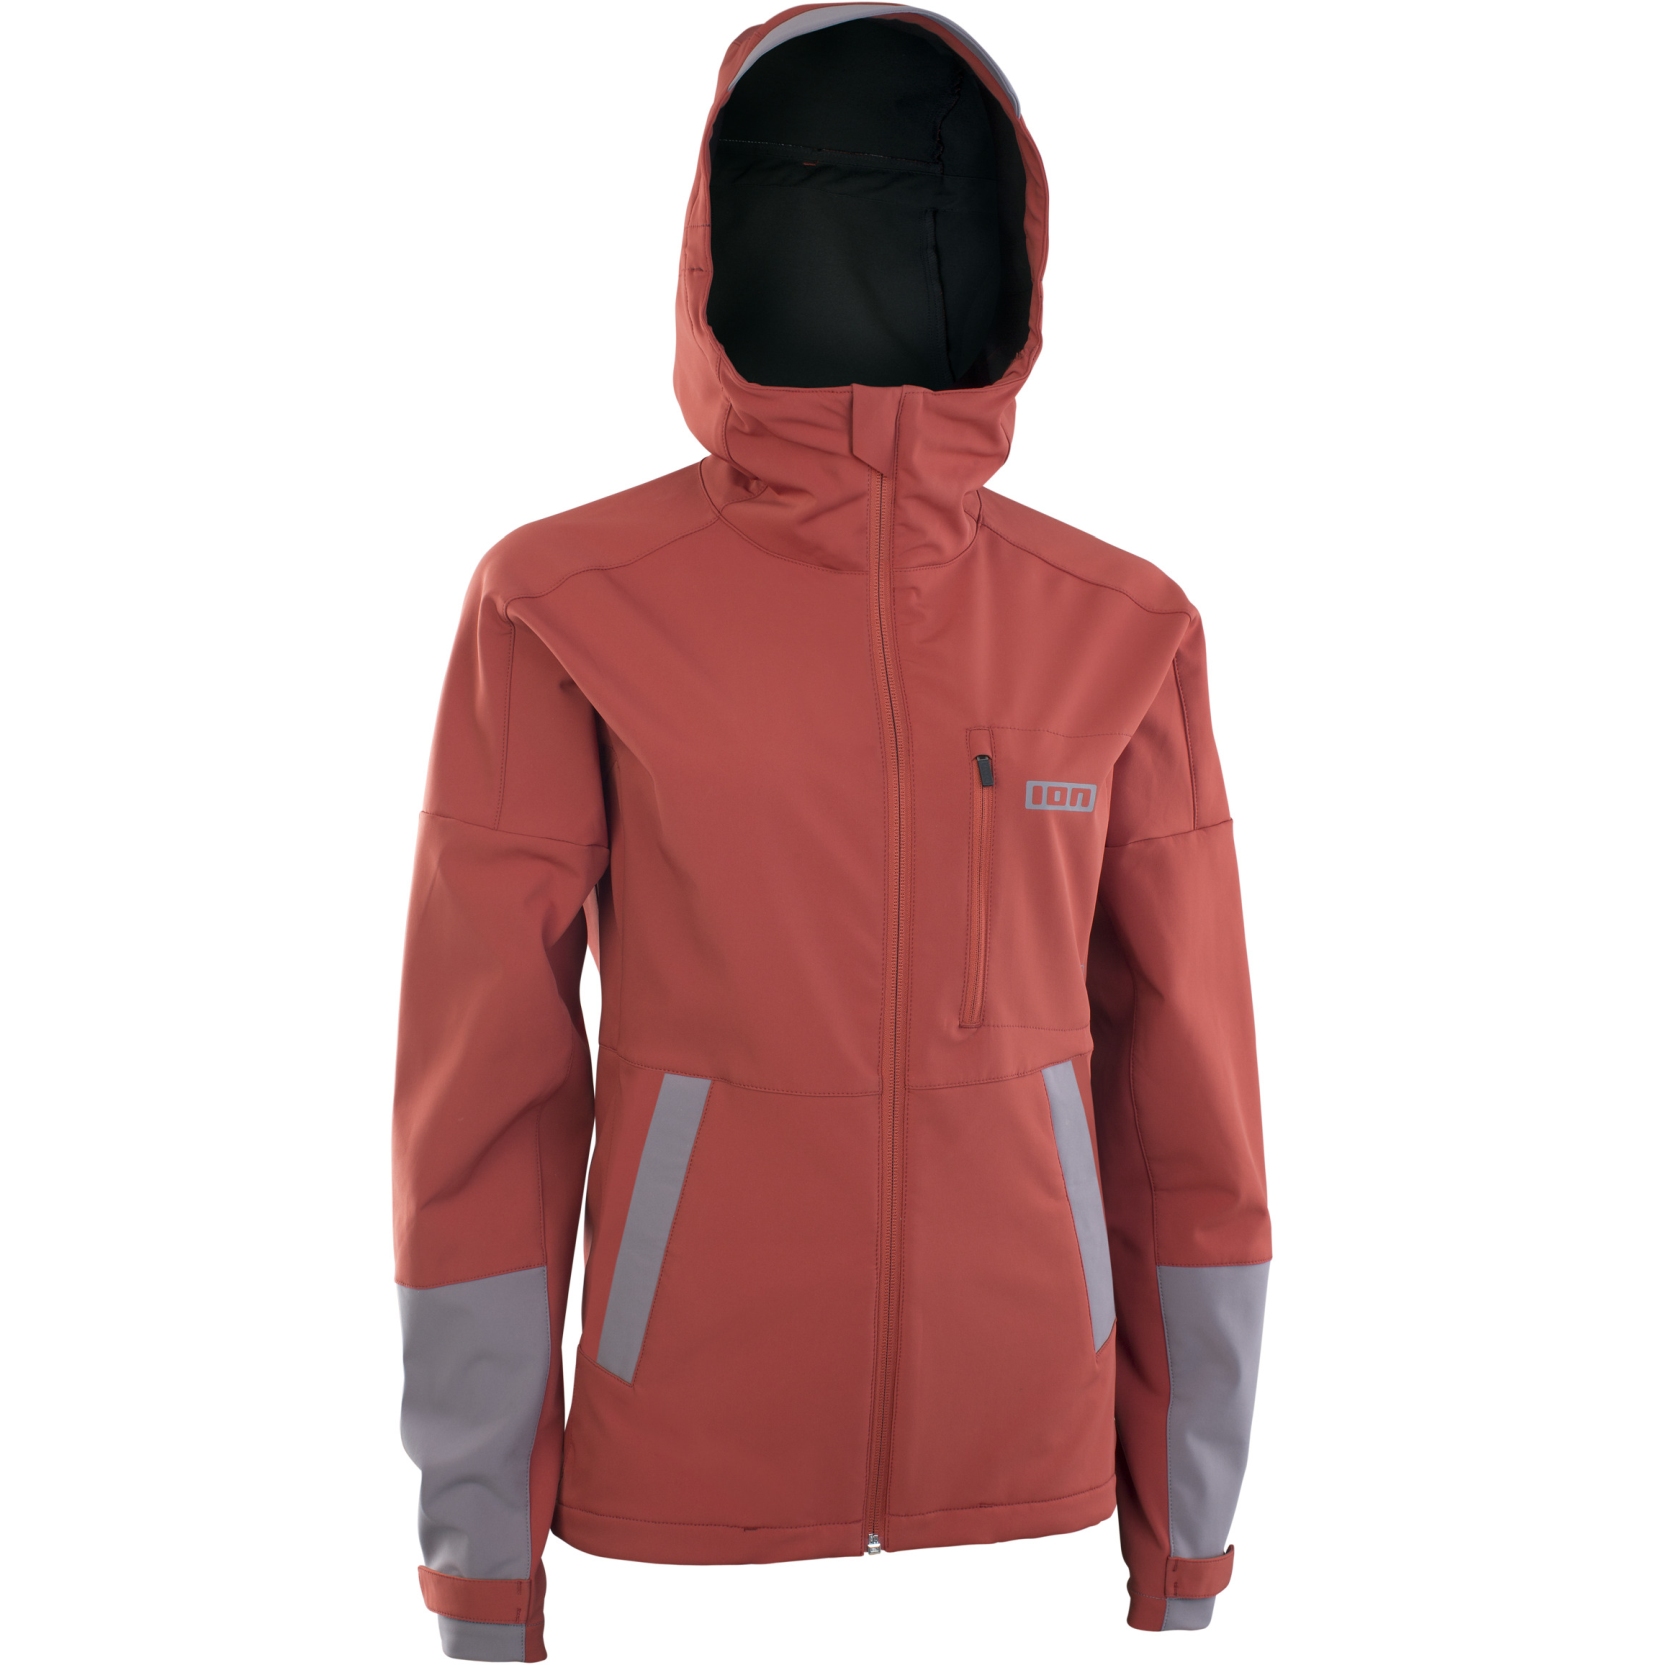 Imagen de ION Bike Outerwear 2 Capas Chaqueta Softshell Mujer - Shelter - Spicy Red